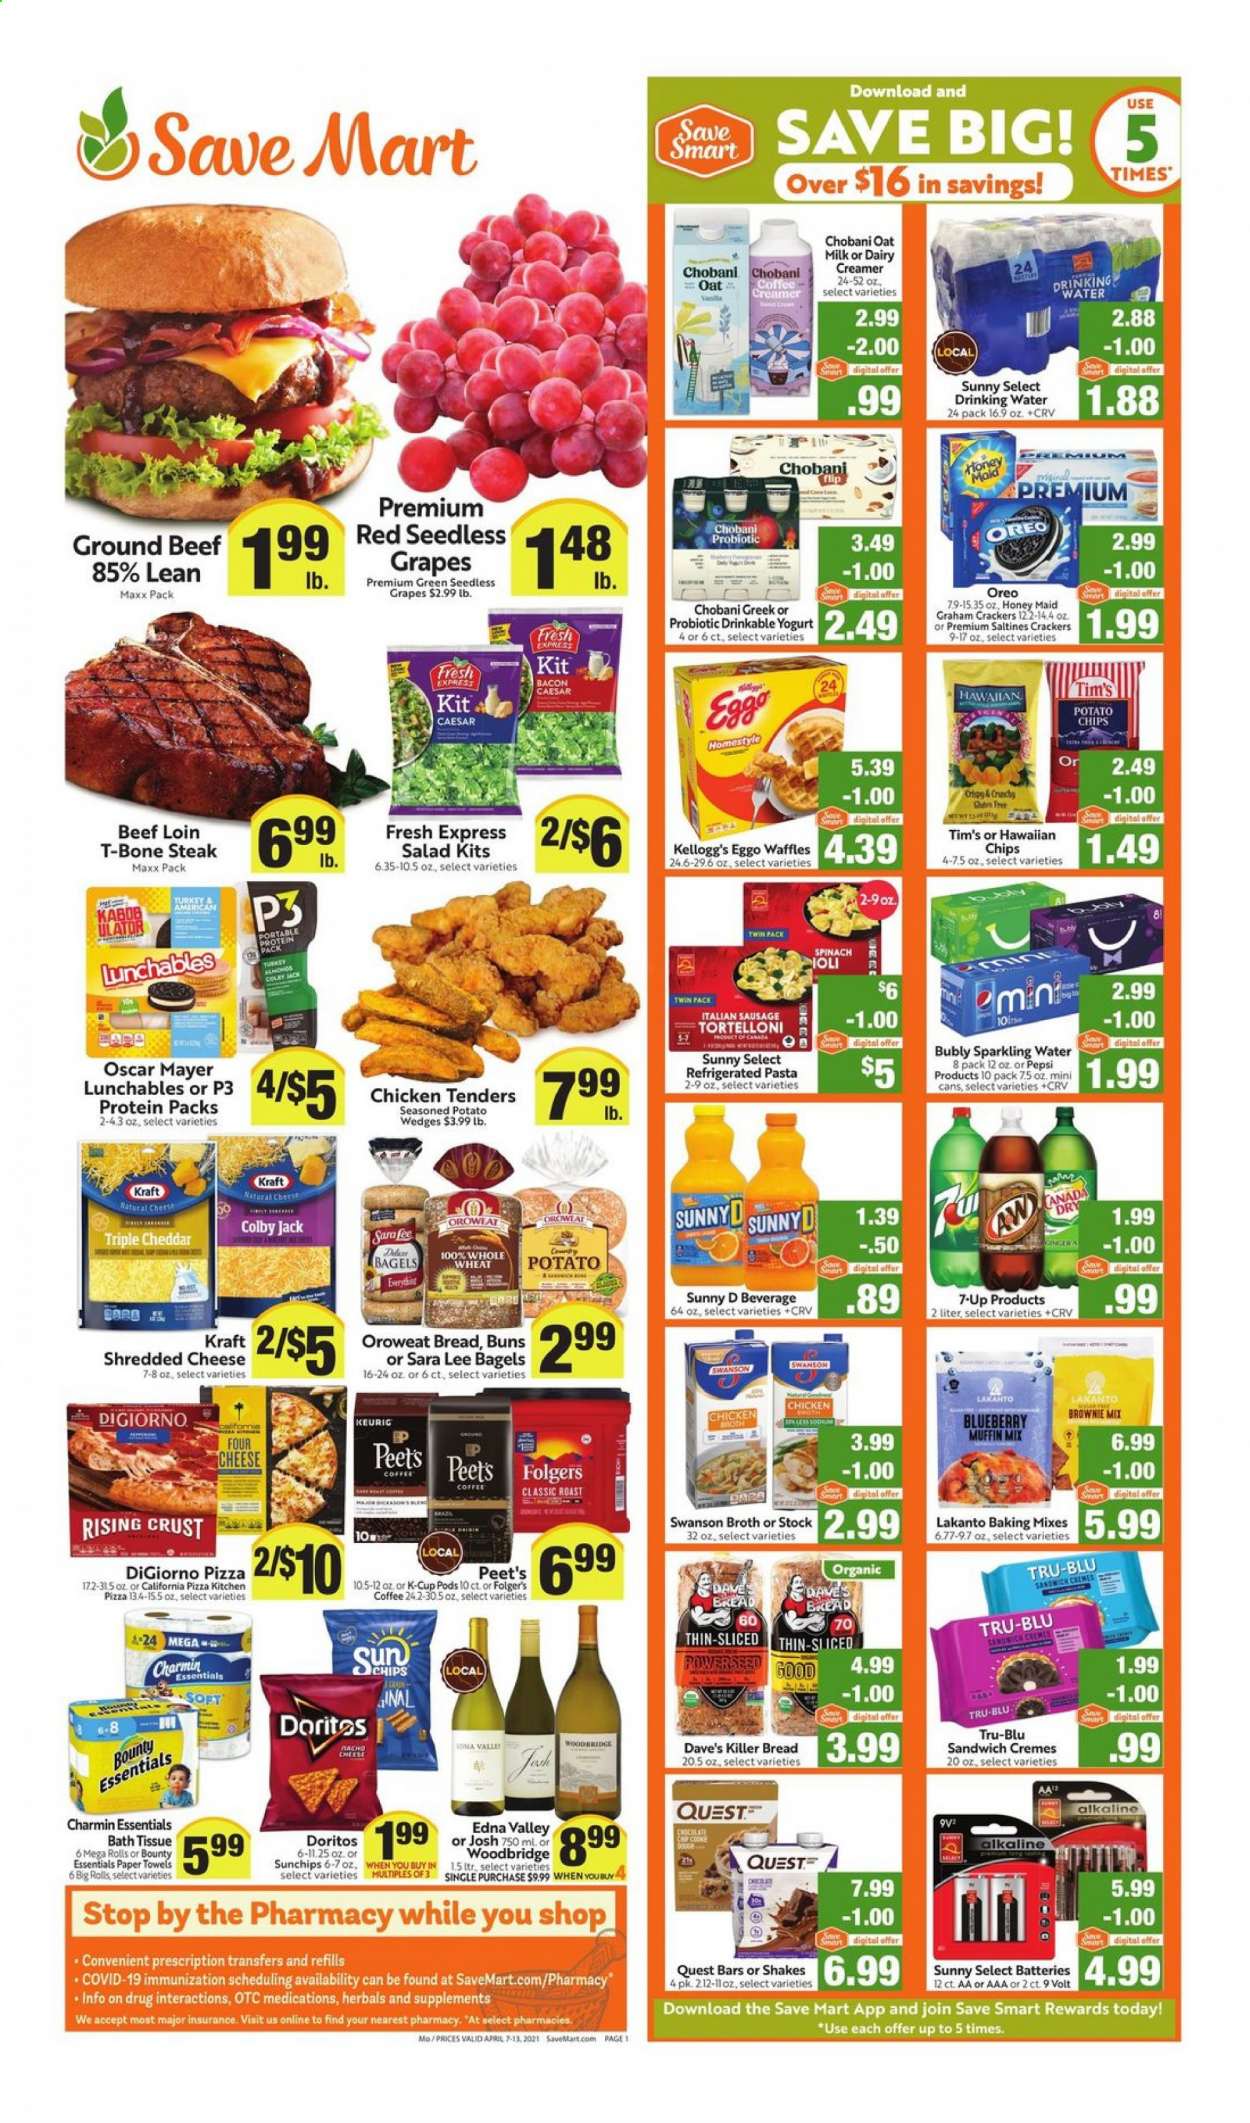 thumbnail - Save Mart Flyer - 04/07/2021 - 04/13/2021 - Sales products - seedless grapes, bagels, buns, Sara Lee, brownies, salad, grapes, chicken tenders, beef meat, ground beef, t-bone steak, steak, pizza, sandwich, Lunchables, Kraft®, bacon, Oscar Mayer, sausage, italian sausage, Colby cheese, shredded cheese, Oreo, yoghurt, Chobani, milk, shake, oat milk, eggs, creamer, potato wedges, graham crackers, Bounty, crackers, Kellogg's, Doritos, potato chips, chips, saltines, broth, Honey Maid, pasta, Pepsi, 7UP, sparkling water, coffee, Folgers, coffee capsules, K-Cups, Keurig, Woodbridge. Page 1.